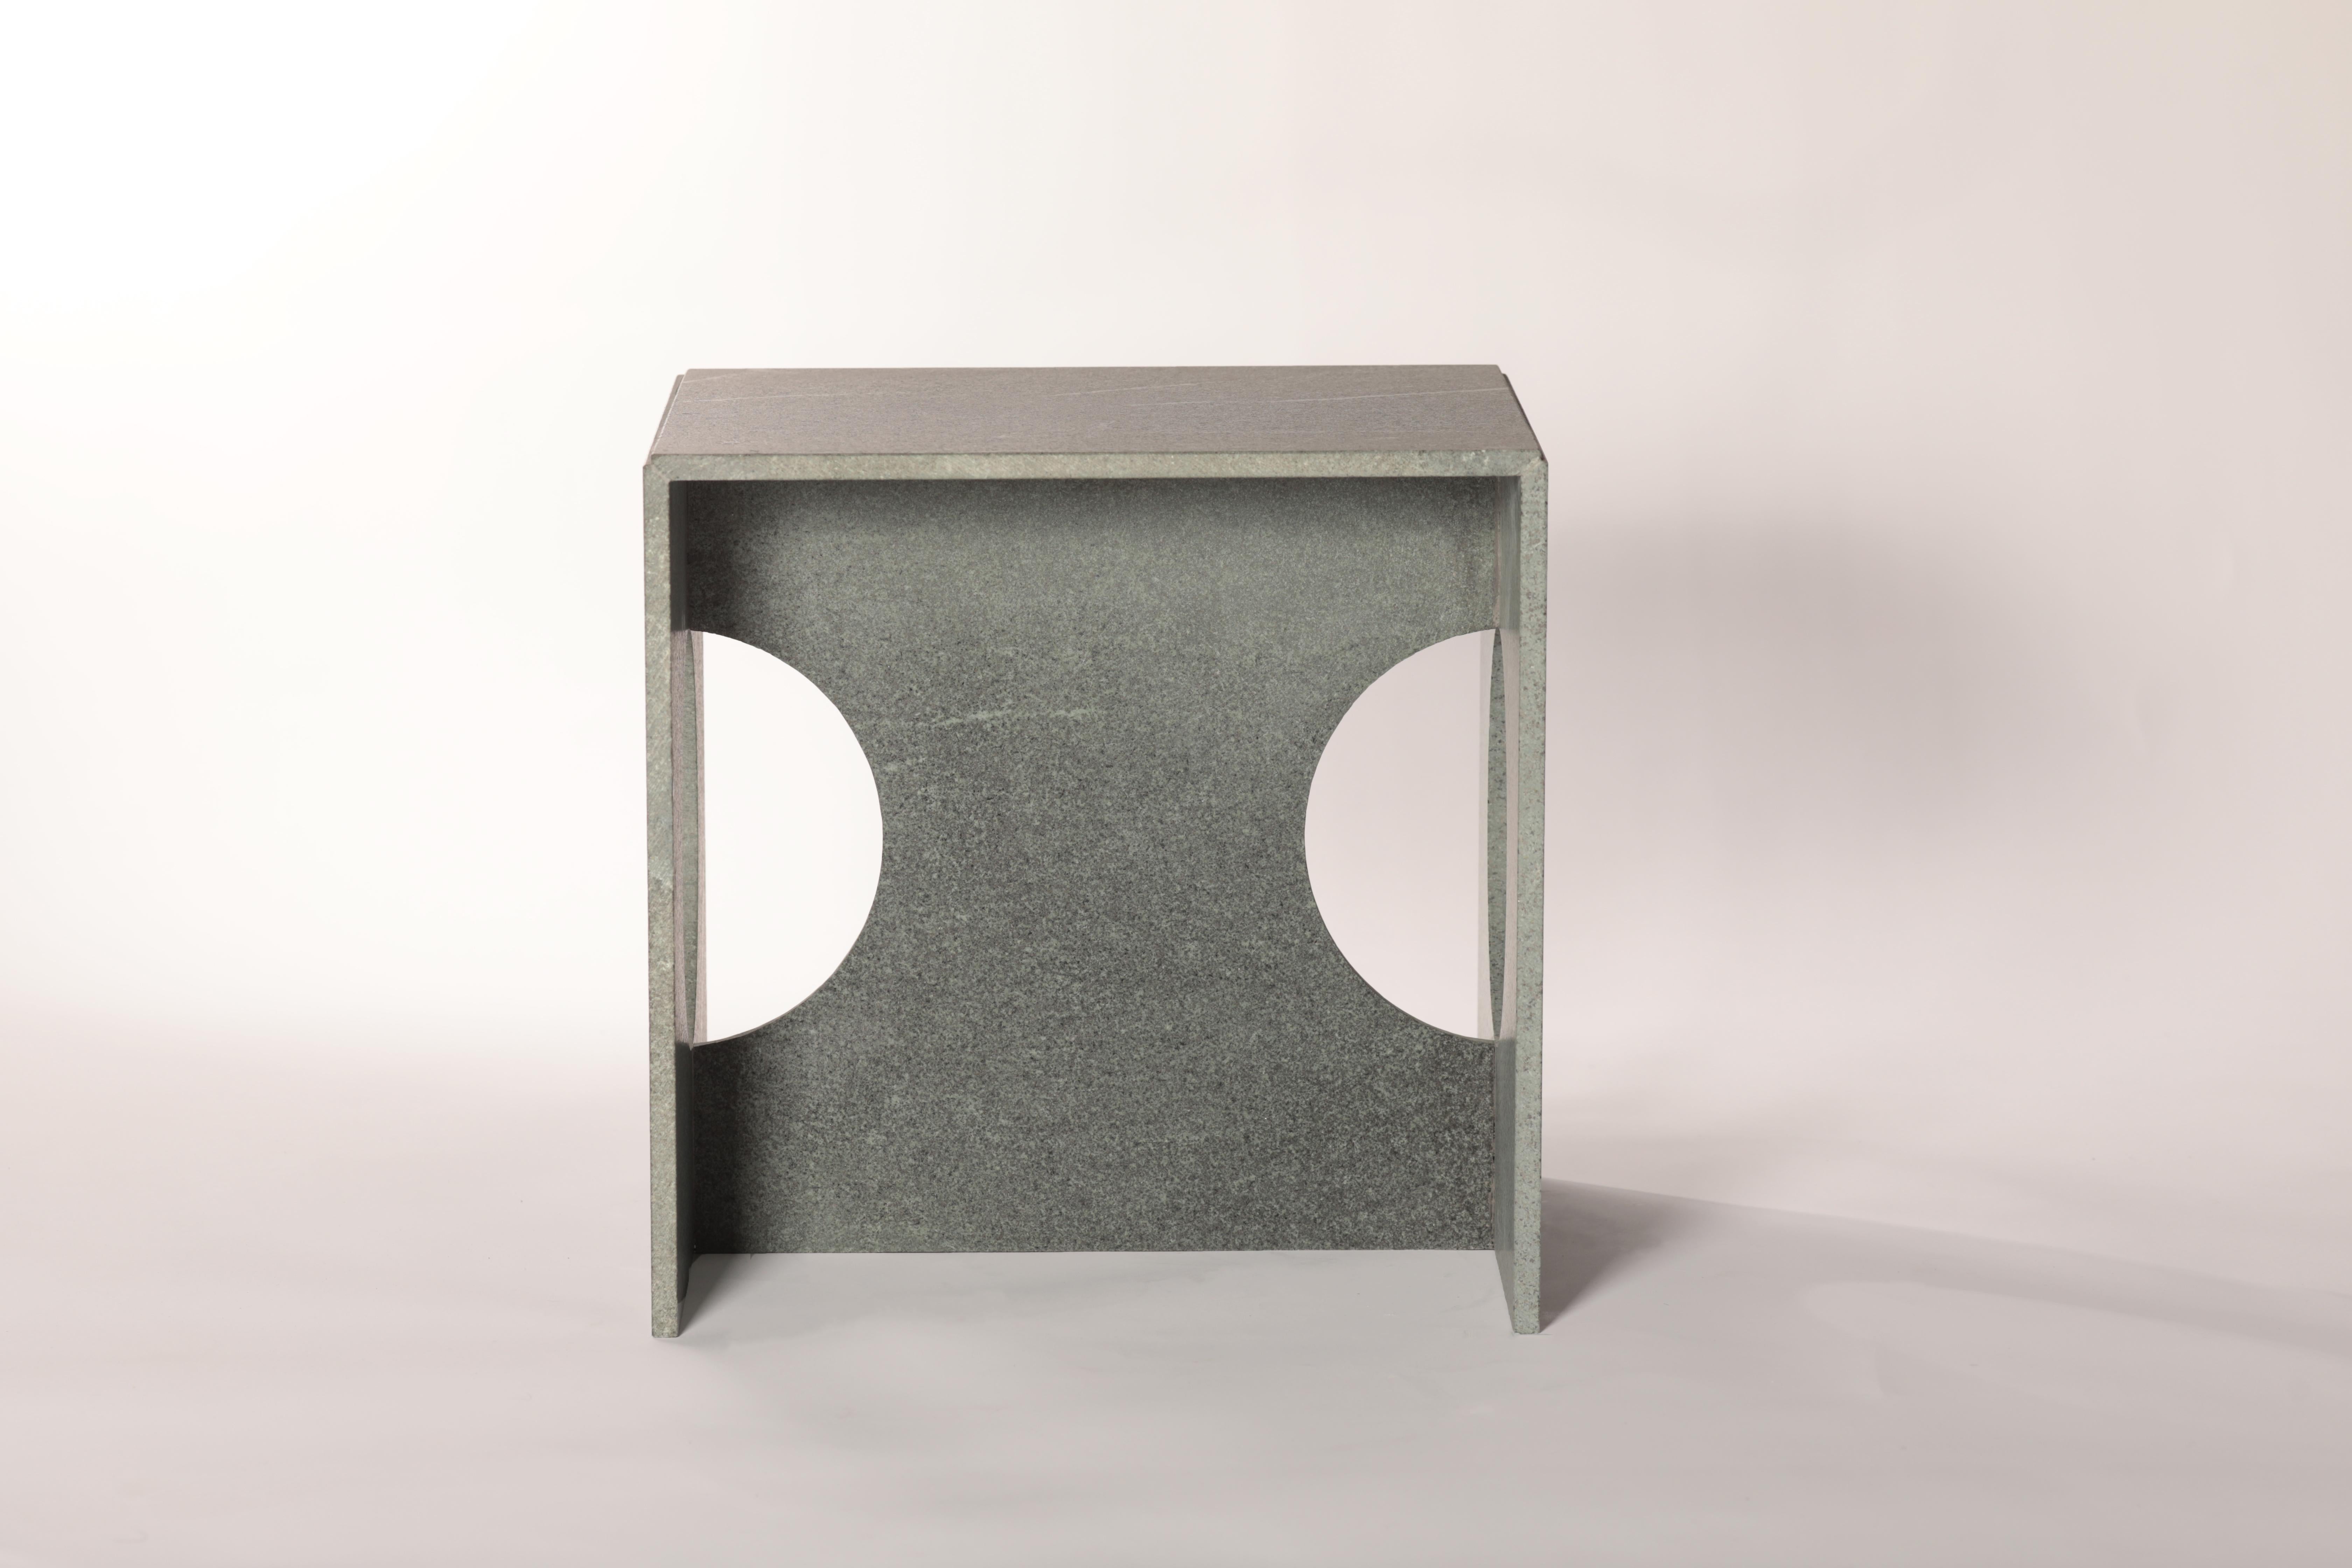 The perfect shape cube becomes more characterized by the voids inside. While lightening the marble, the circle voids also provides ease of use and make it more comfortable to carry it around. It will change the dynamics of the space with its unique